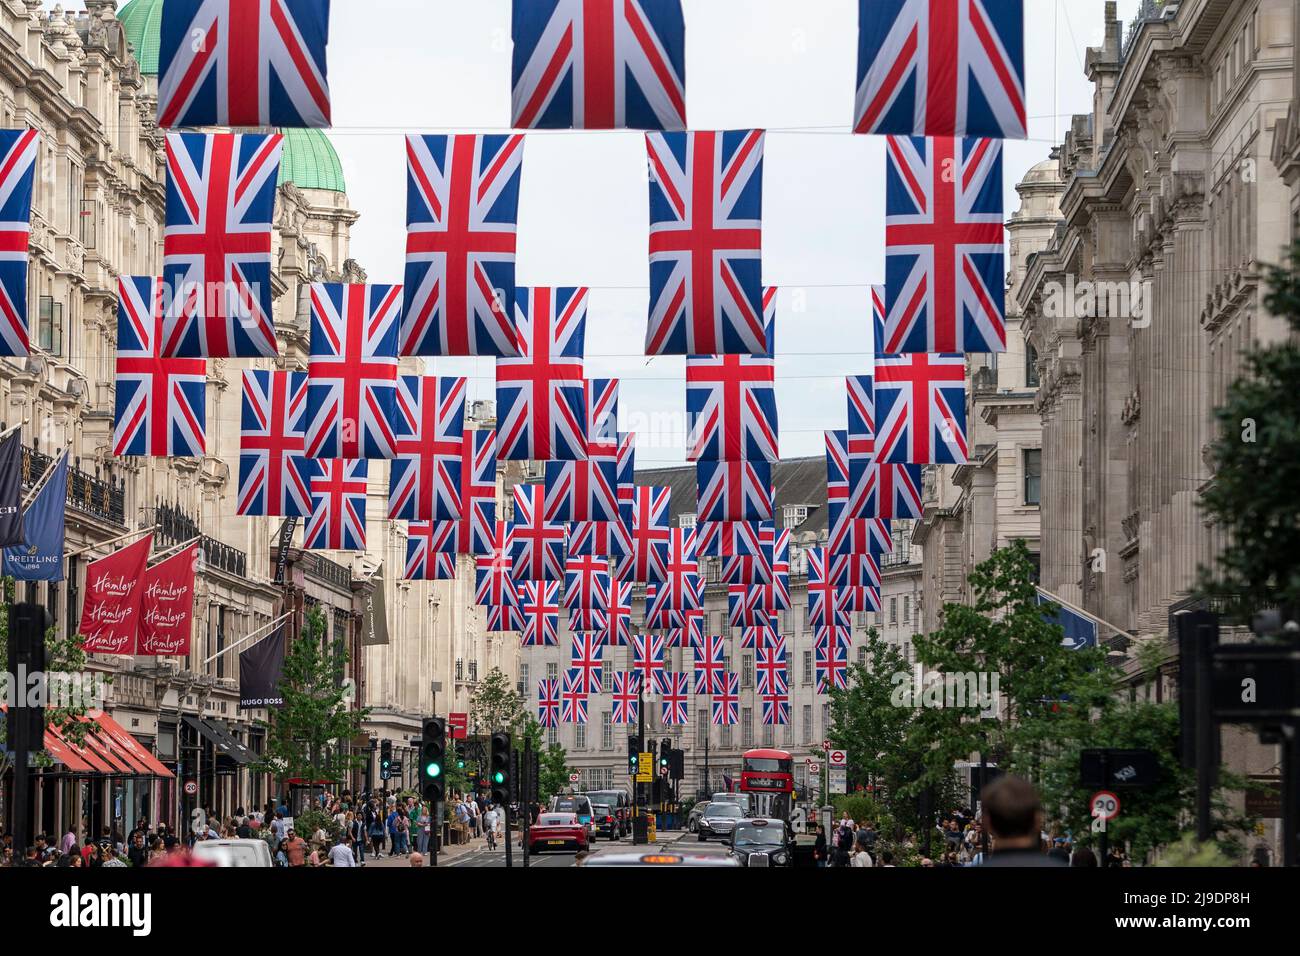 Union Jack flags hang in Regents Street in London ahead of the Platinum Jubilee celebration Stock Photo